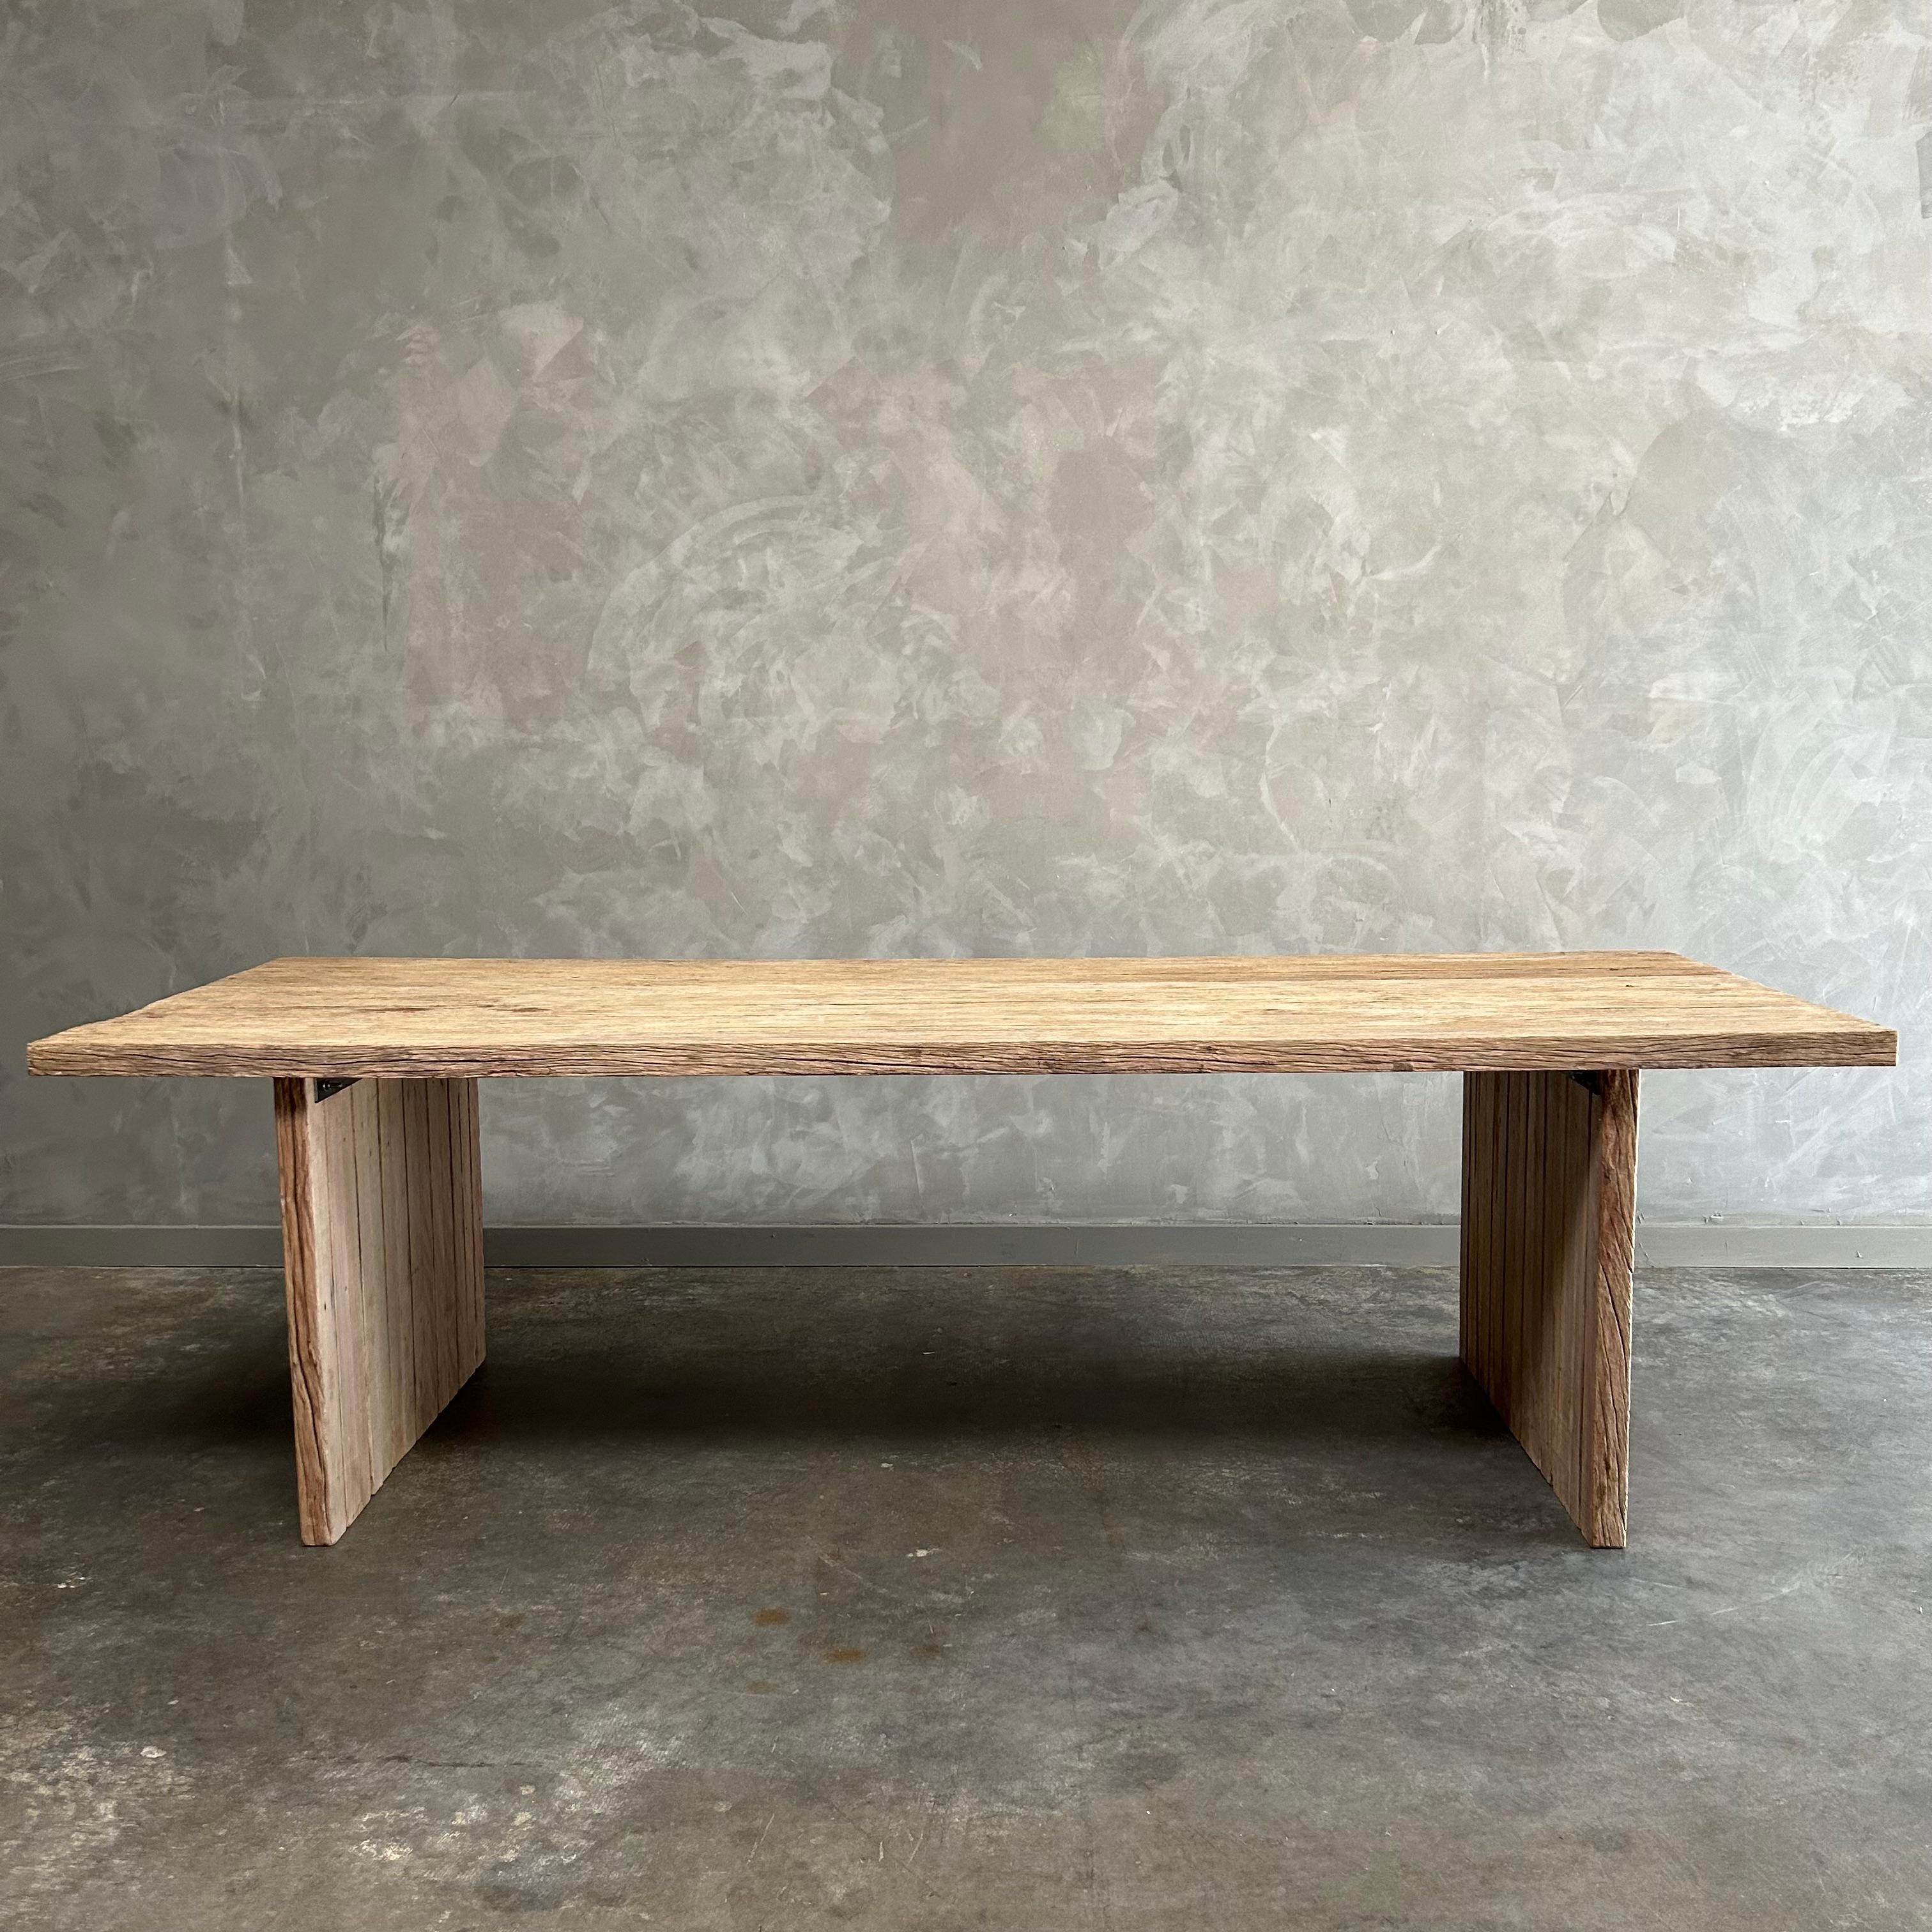 Elm dining table 
Size: 86”W x 38”D x 30”H
Custom made, beautiful solid elm wood top, with natural characteristics, and double pedestal base. Top is removable from base(s).
Seats 6 comfortably.
Solid and sturdy, ready for everyday use.
 